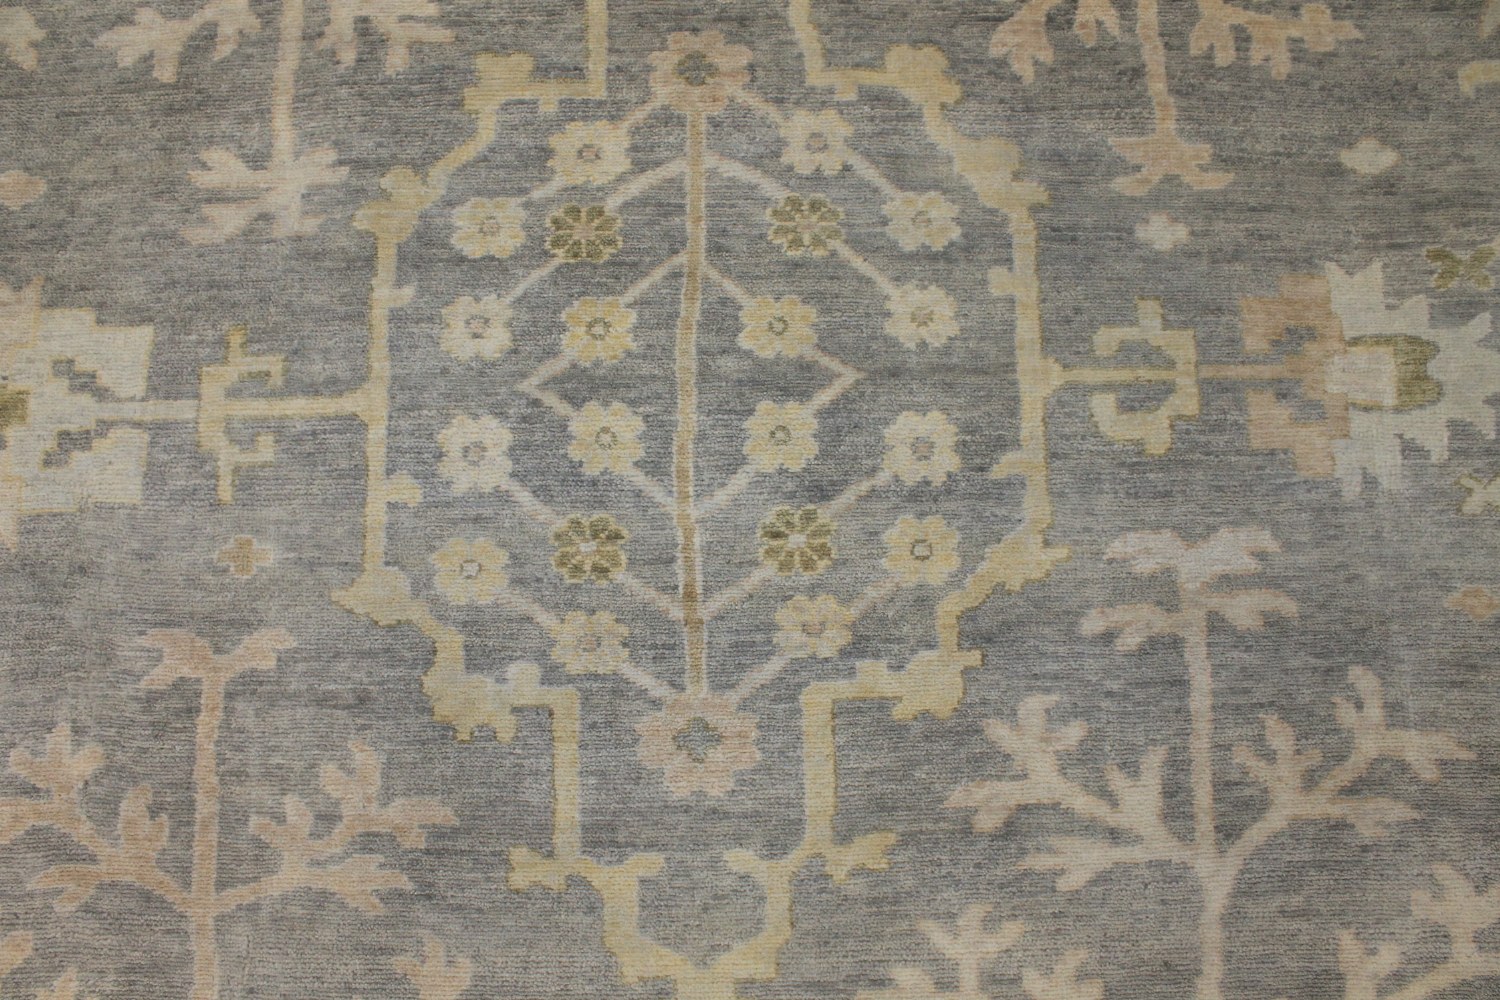 OVERSIZE Oushak Hand Knotted Wool Area Rug - MR026431